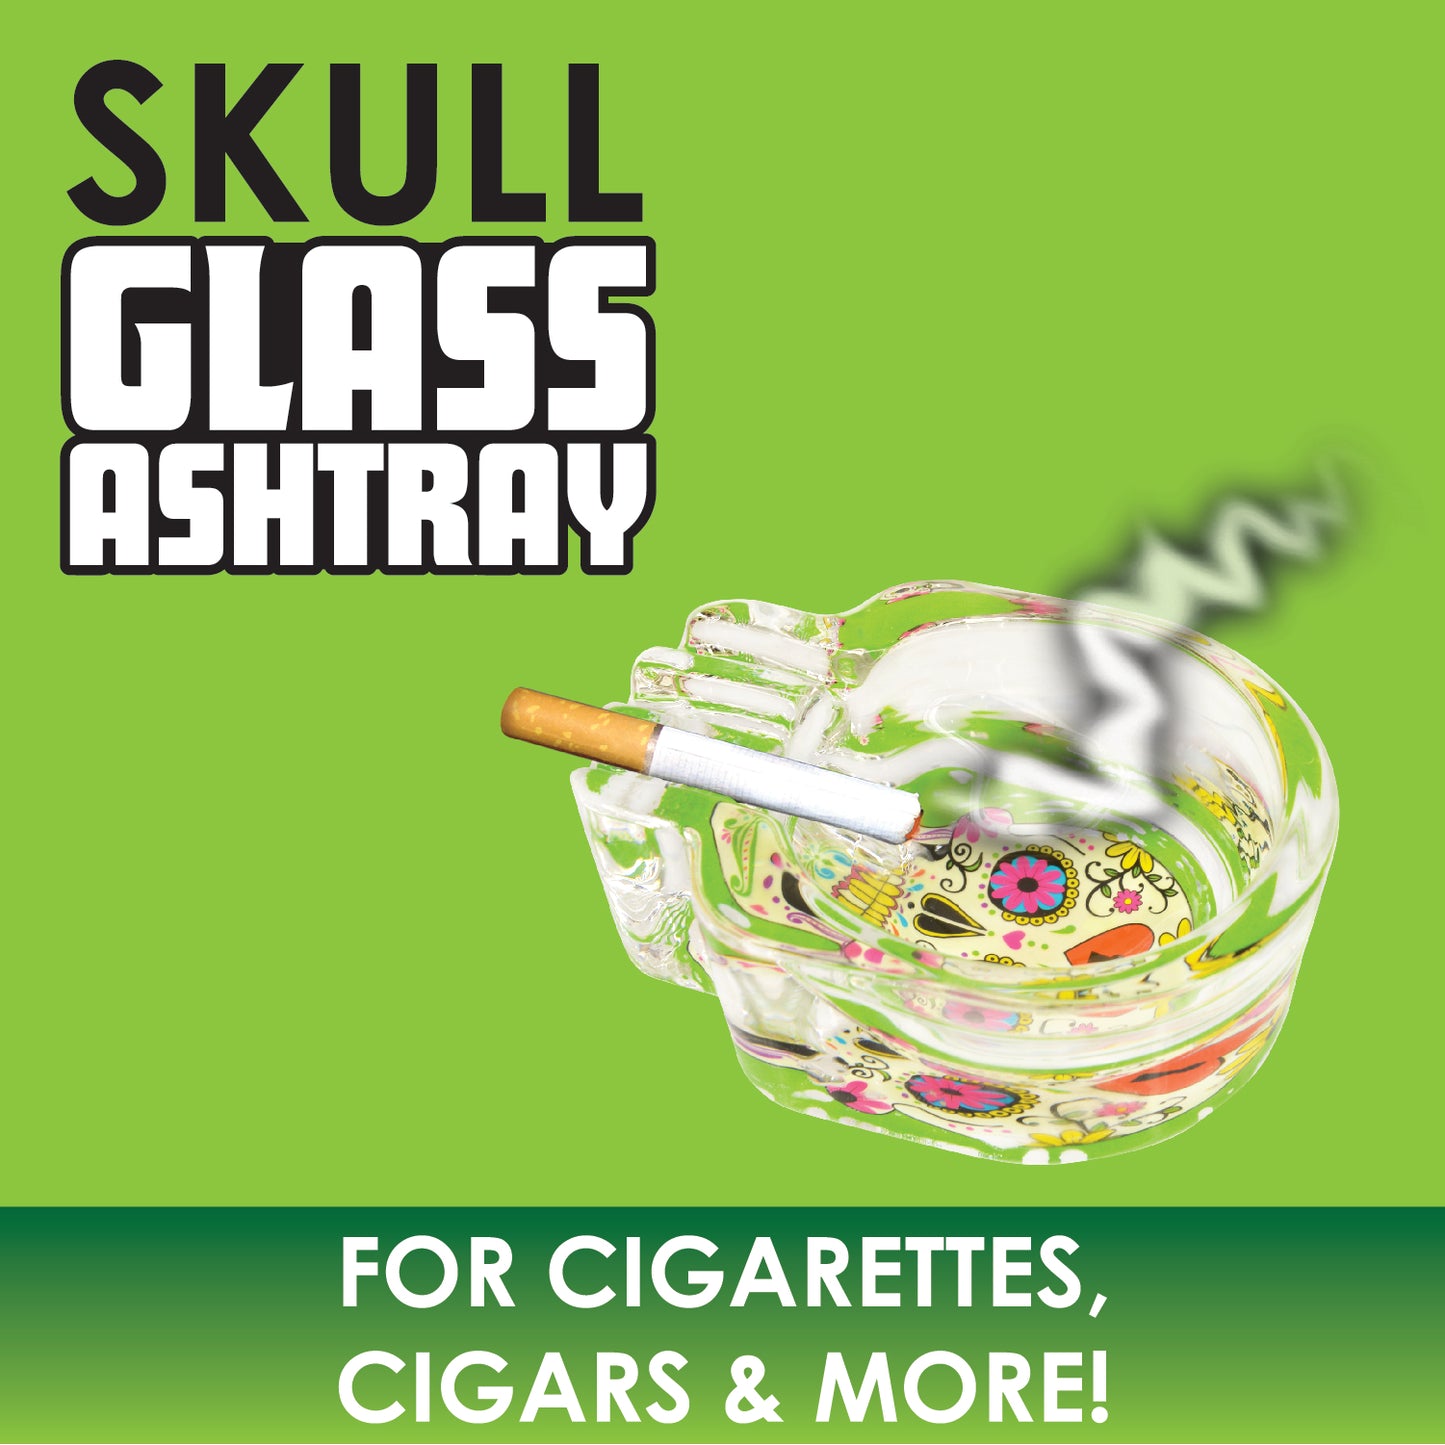 ITEM NUMBER 040319 SKULL GLASS ASHTRAY D 4 PIECES PER DISPLAY